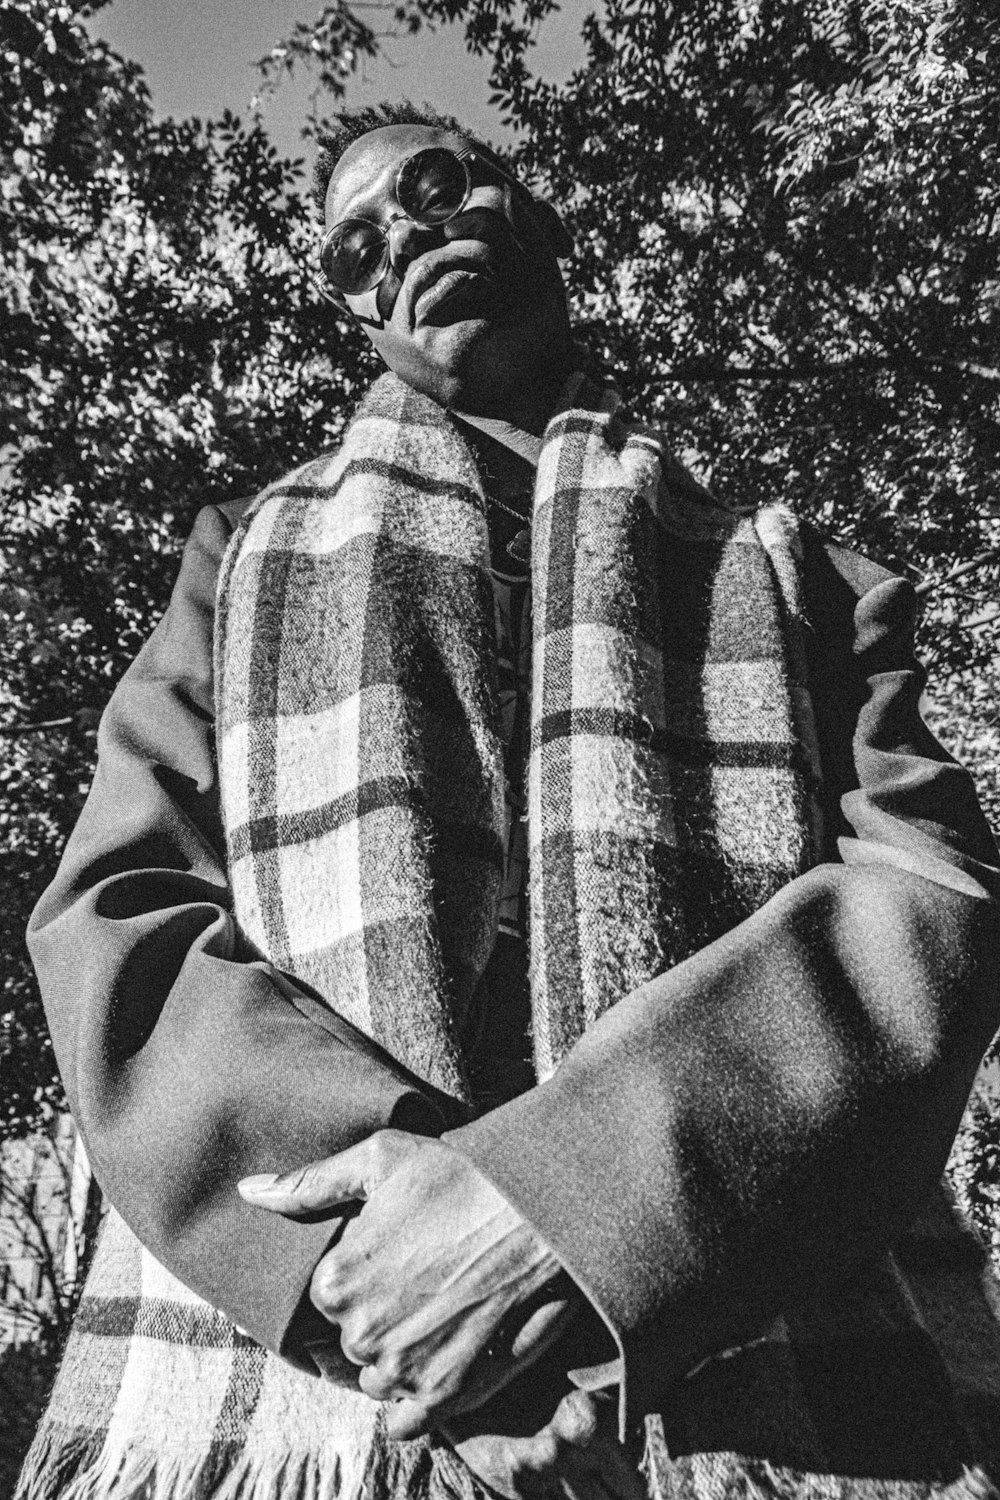 grayscale photography of man wearing coat and scarf